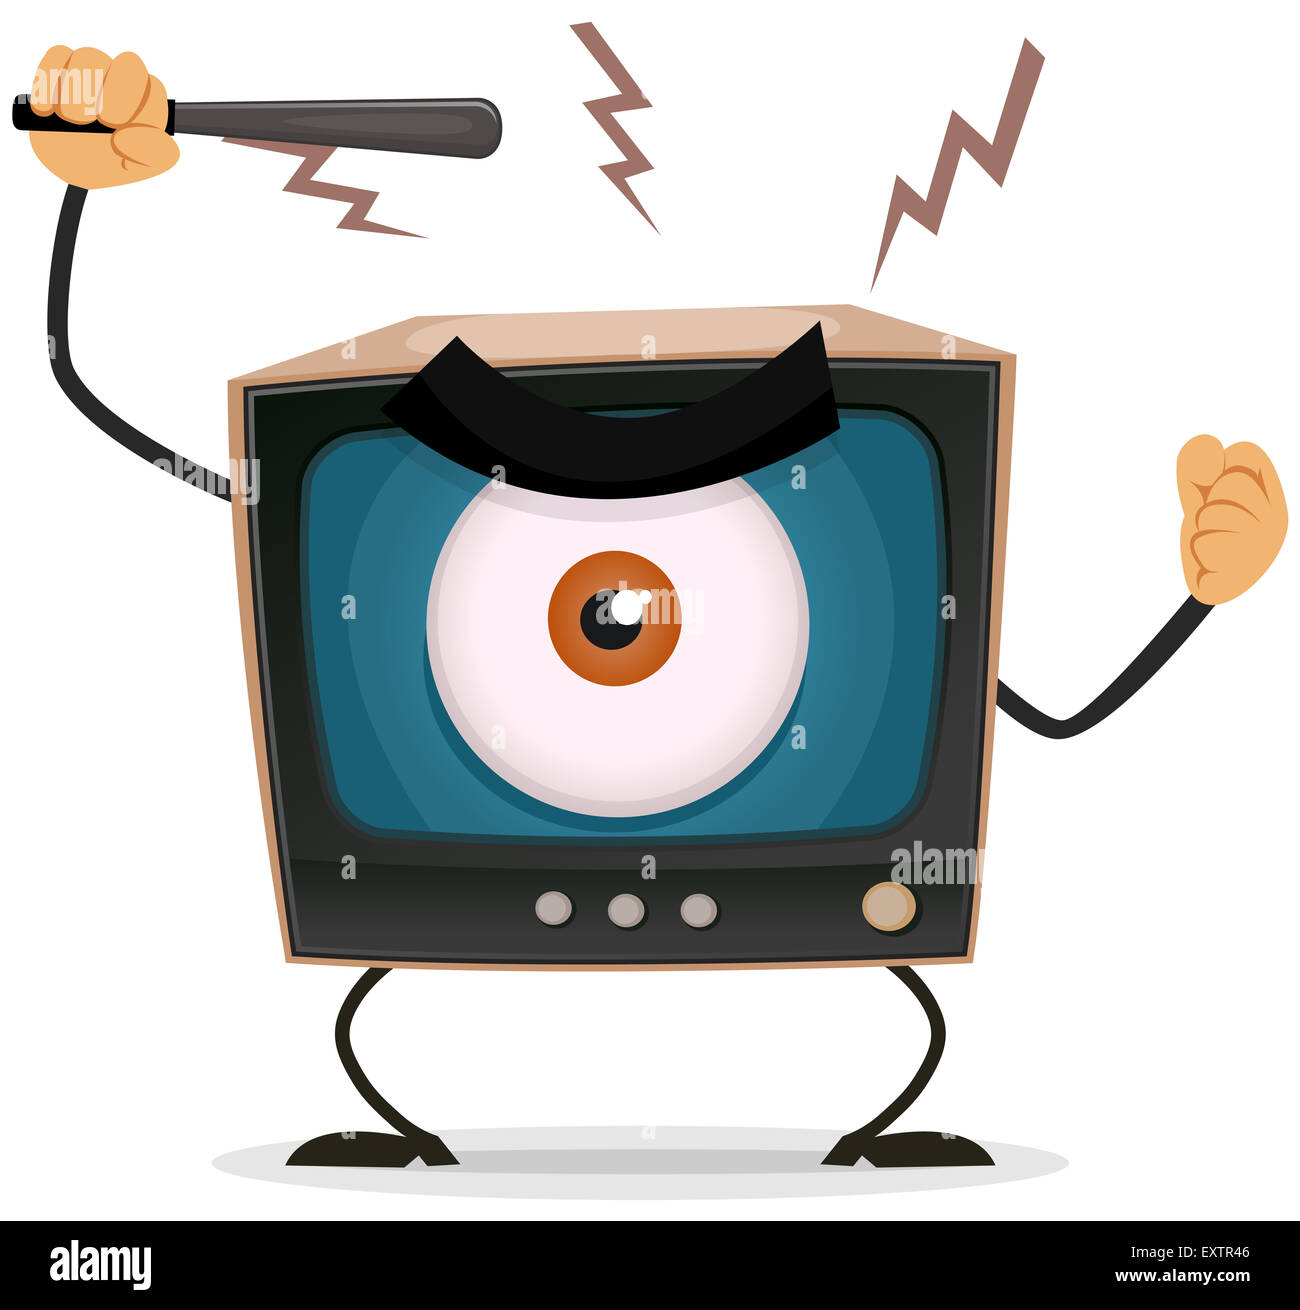 Illustration of a cartoon angry retro tv character with big brother eye watching and holding nightstick to hit your brain Stock Photo